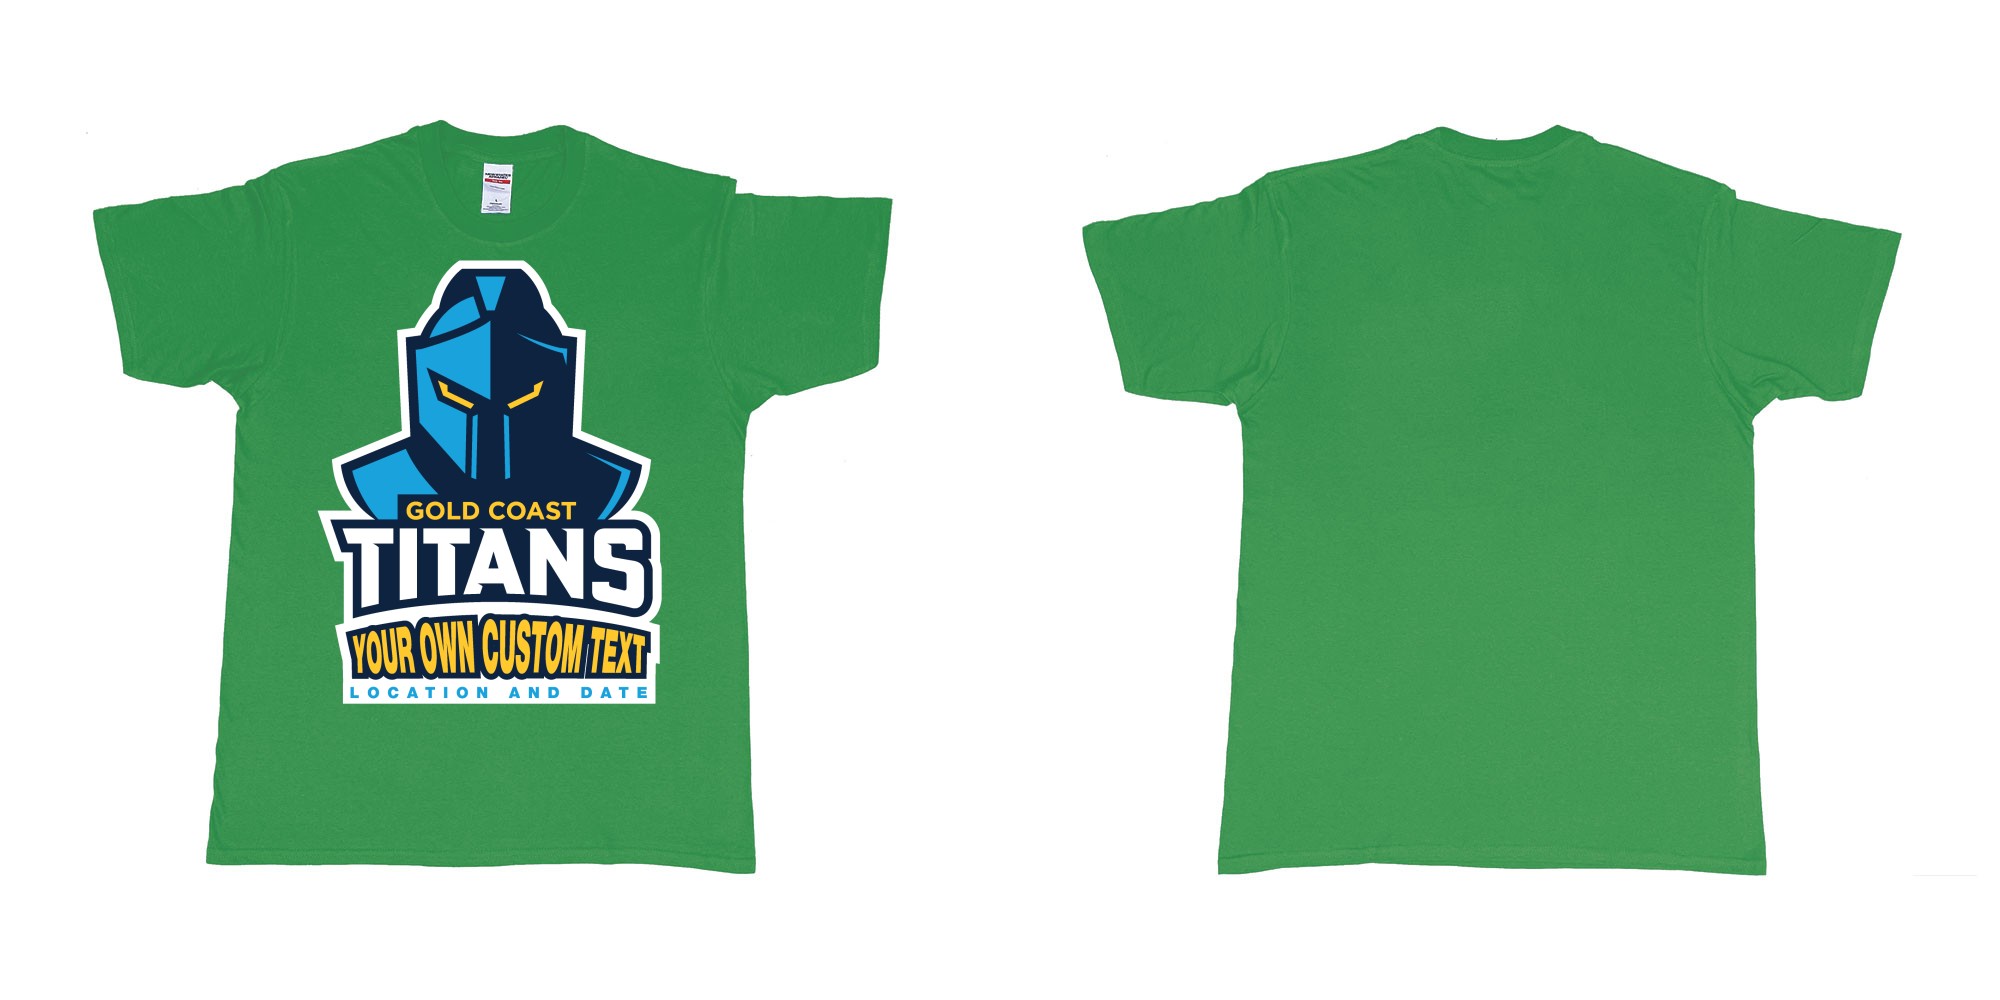 Custom tshirt design gold coast titans own custom design print in fabric color irish-green choice your own text made in Bali by The Pirate Way